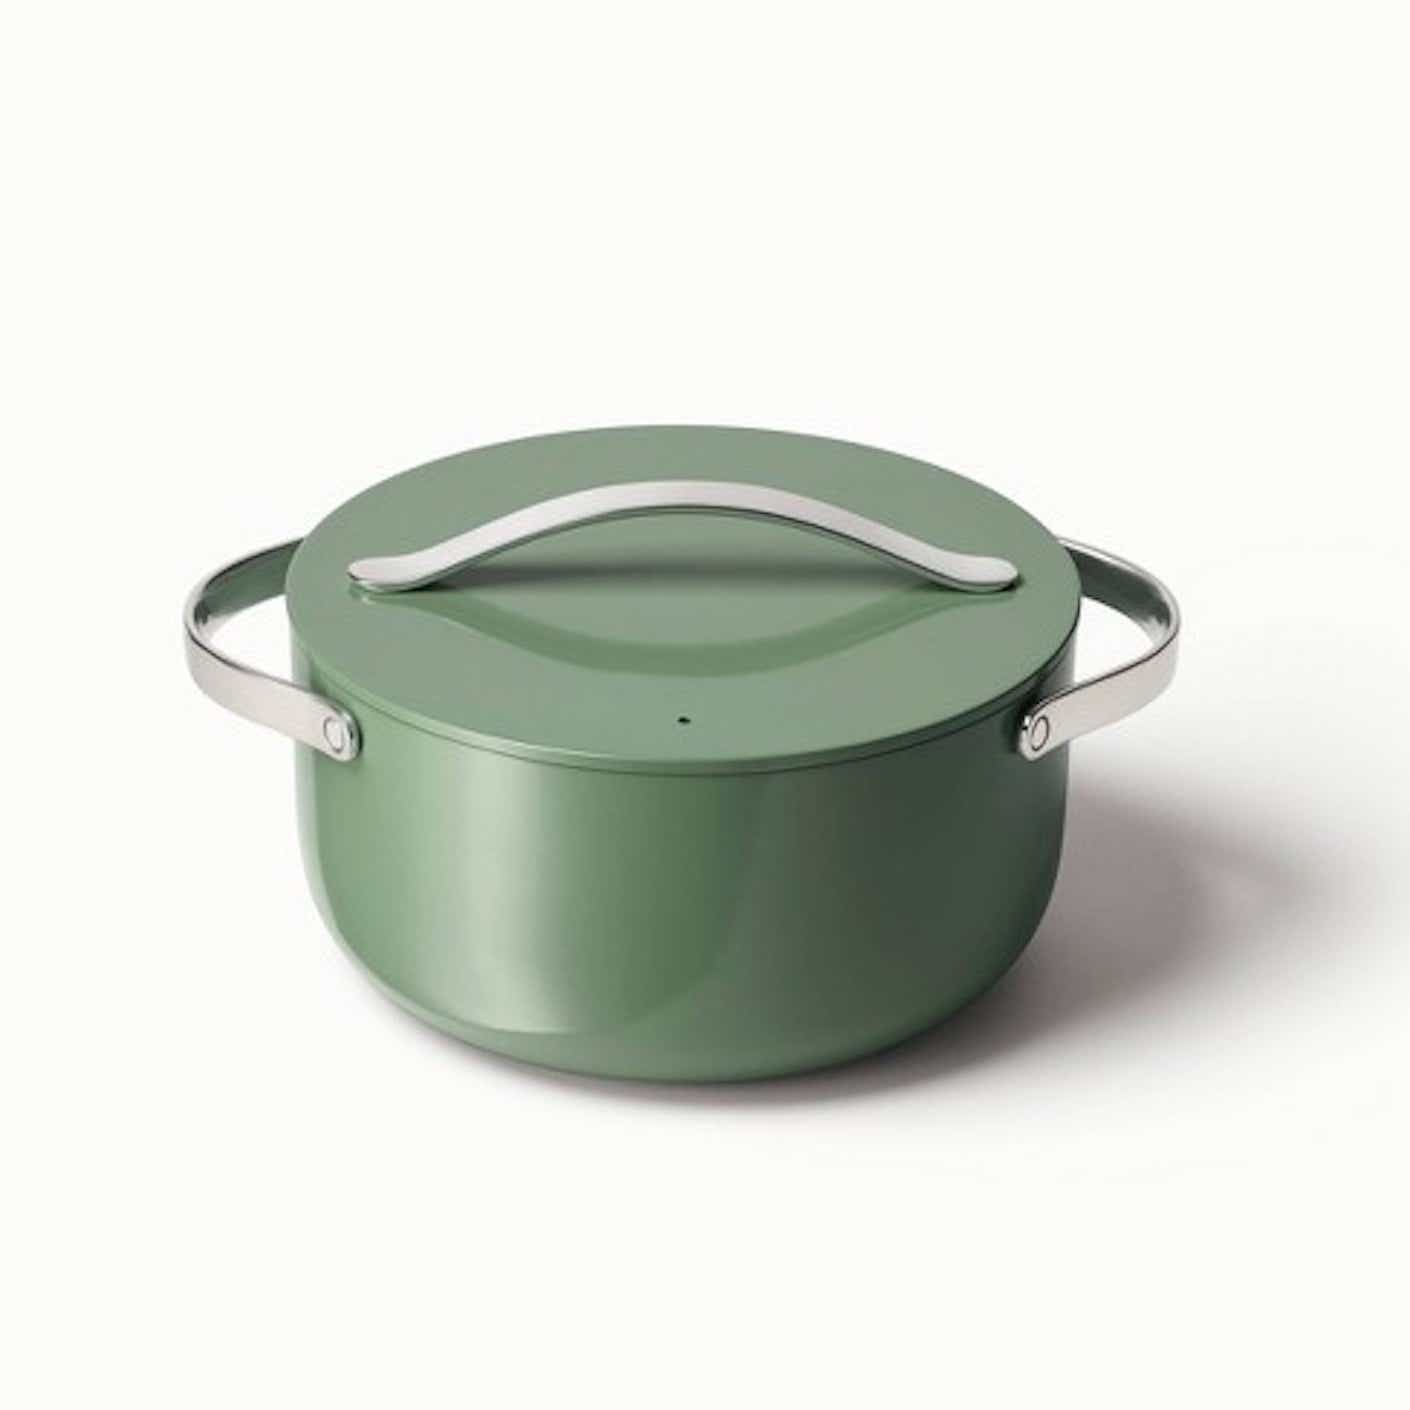 A sage green dutch oven with metal handles is shown in front of a white background.